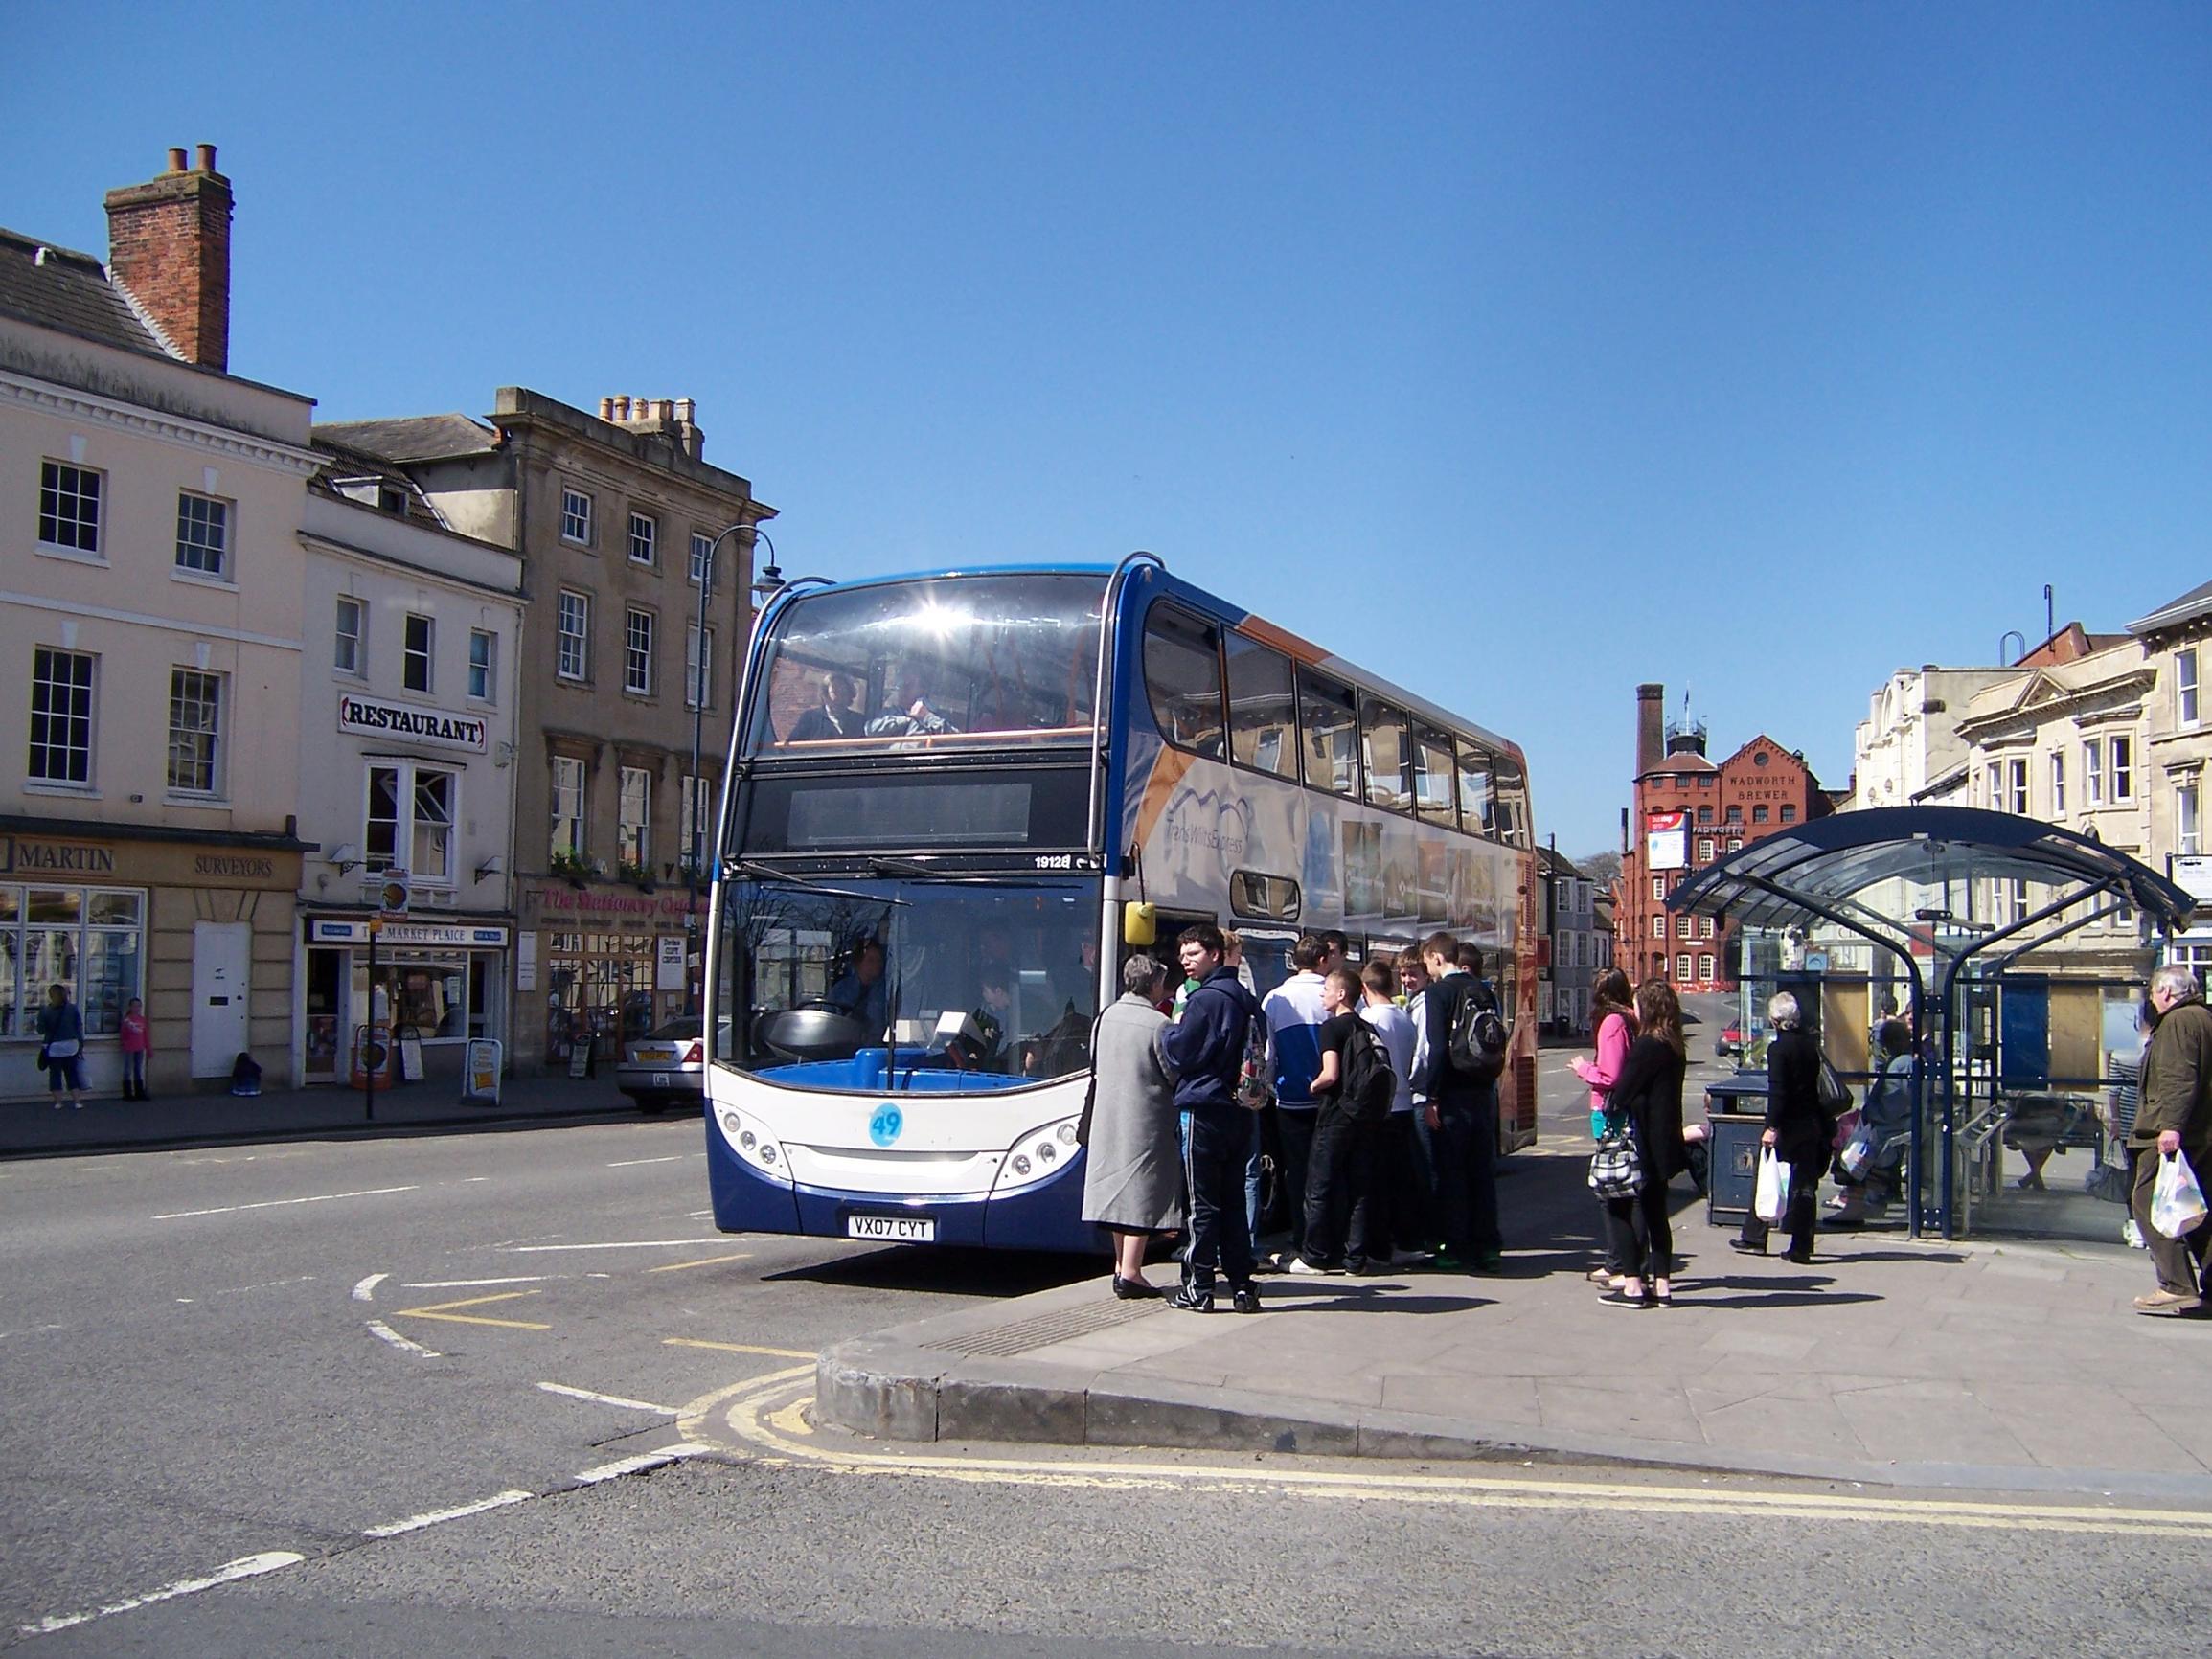 Rural councils face barriers to providing a good bus network